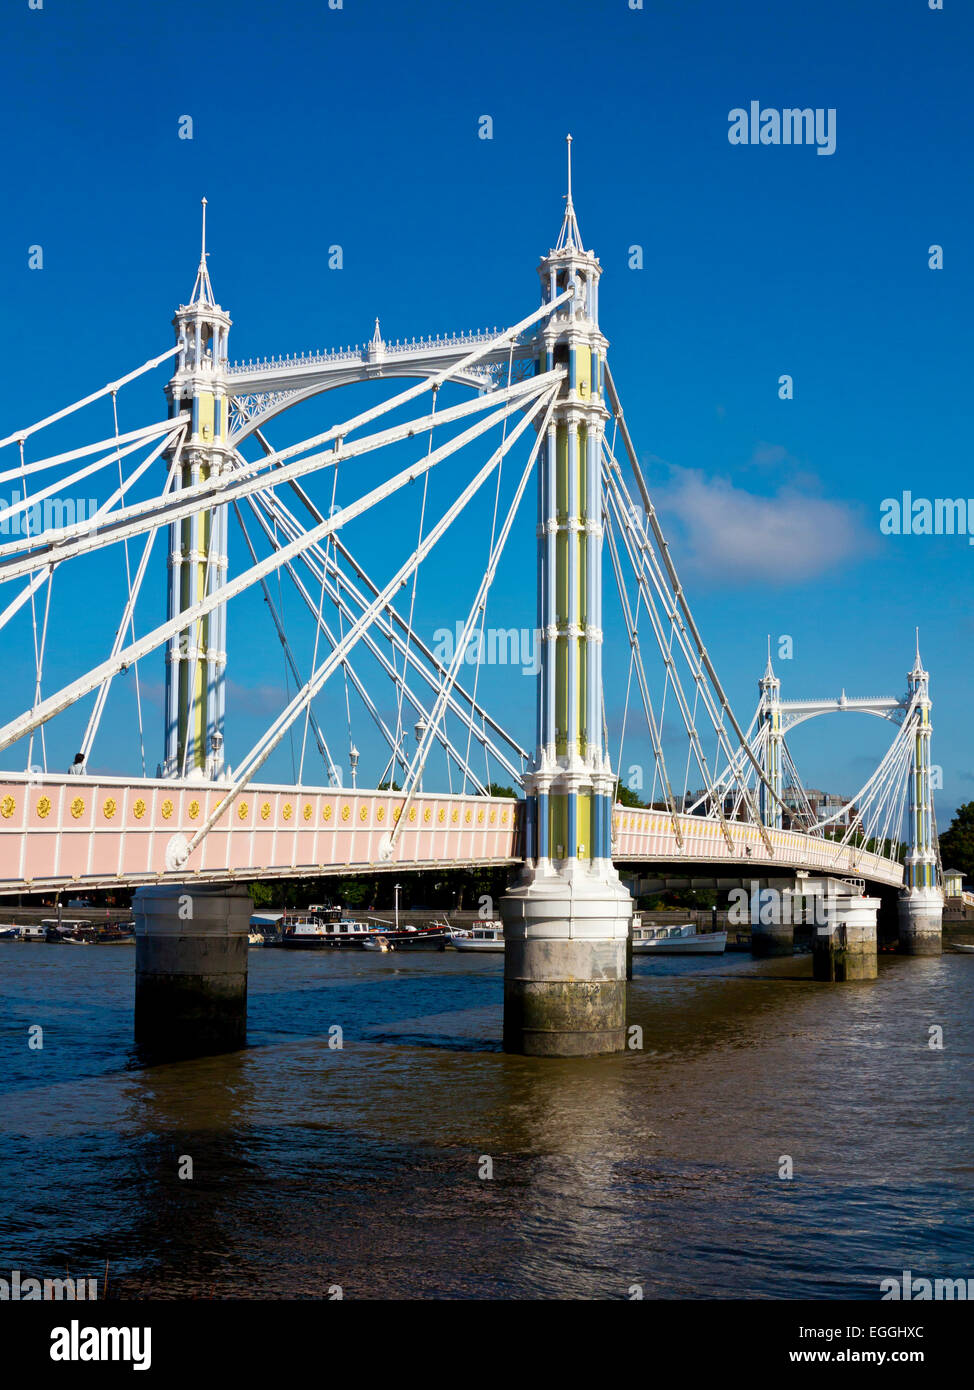 Albert Bridge in central London connecting Chelsea and Battersea designed by Rowland Mason Ordish 1873 Stock Photo